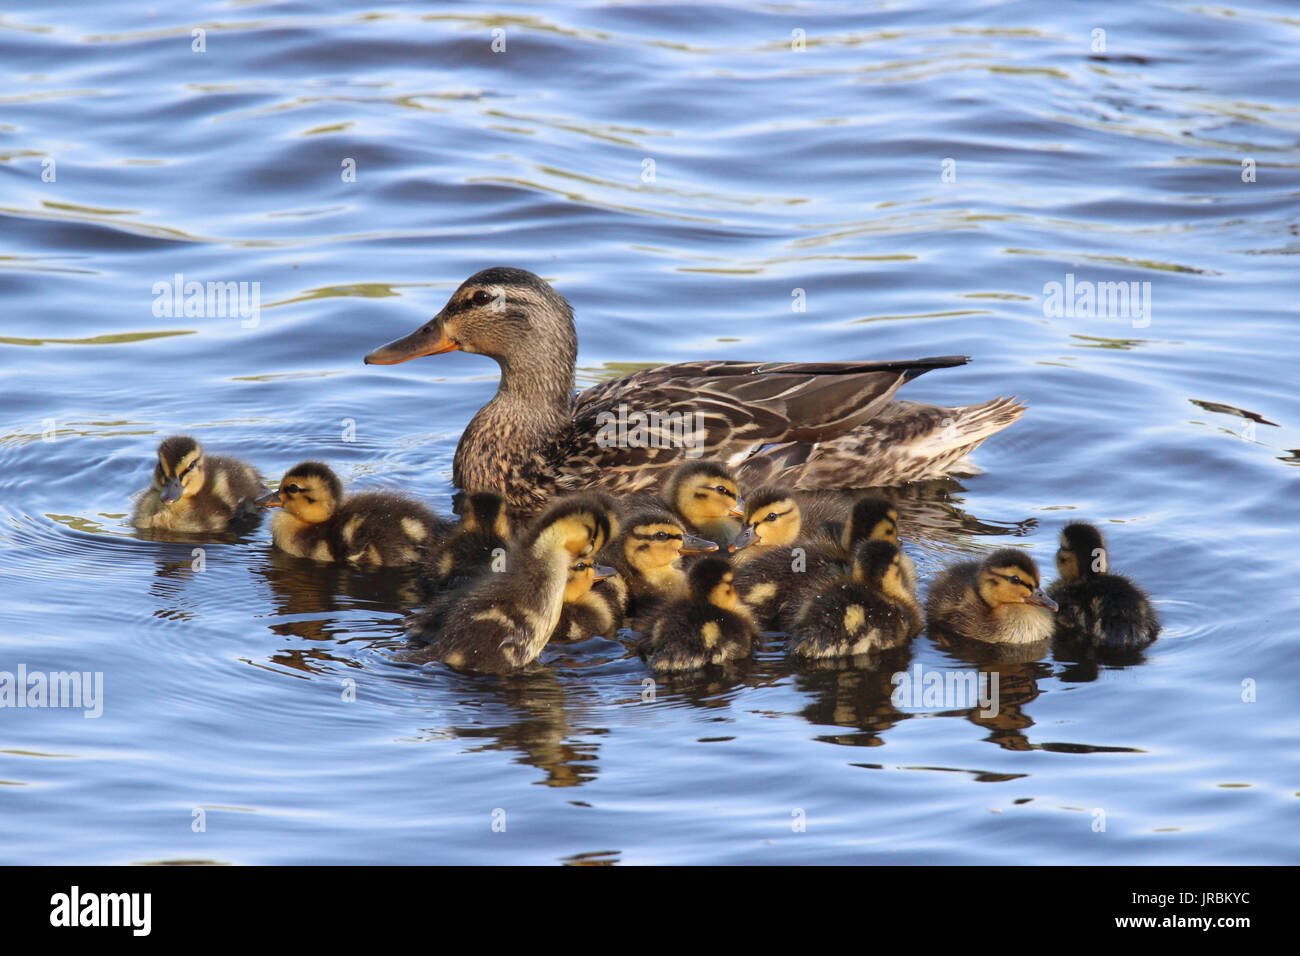 A mother mallard swimming on a pond with her family of ducklings Stock Photo